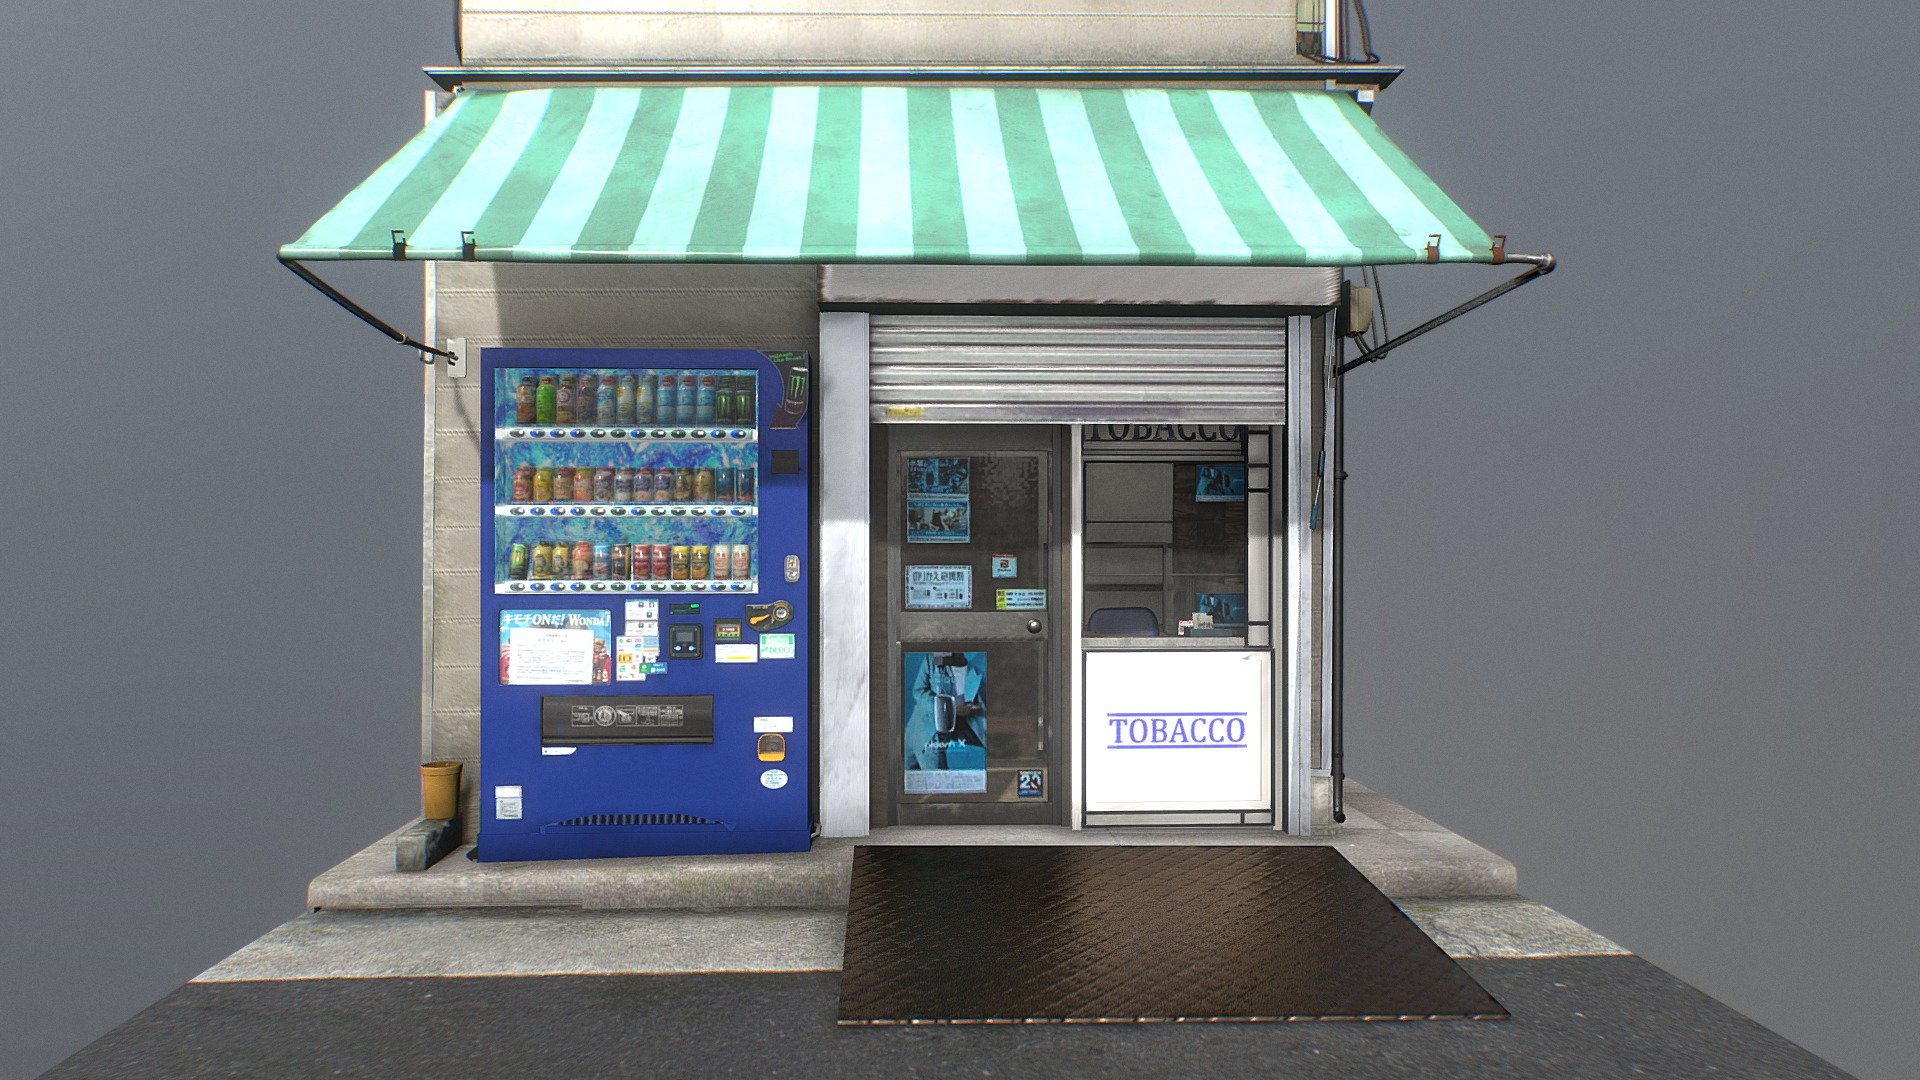 For the best experience, please enable high-quality textures in the Sketchfab viewer.

Youtube timelapse of the making: https://youtu.be/vz__LXk54yU

I created a 3D model of a quaint, little tobacco shop I came across in Tokyo, Japan. Even though it was closed, its unique character and the vending machine outside piqued my interest. Using Blender and high-resolution textures from 2K to 8K, I aimed for a photorealistic style to recreate this charming piece of Japanese city life 3d model